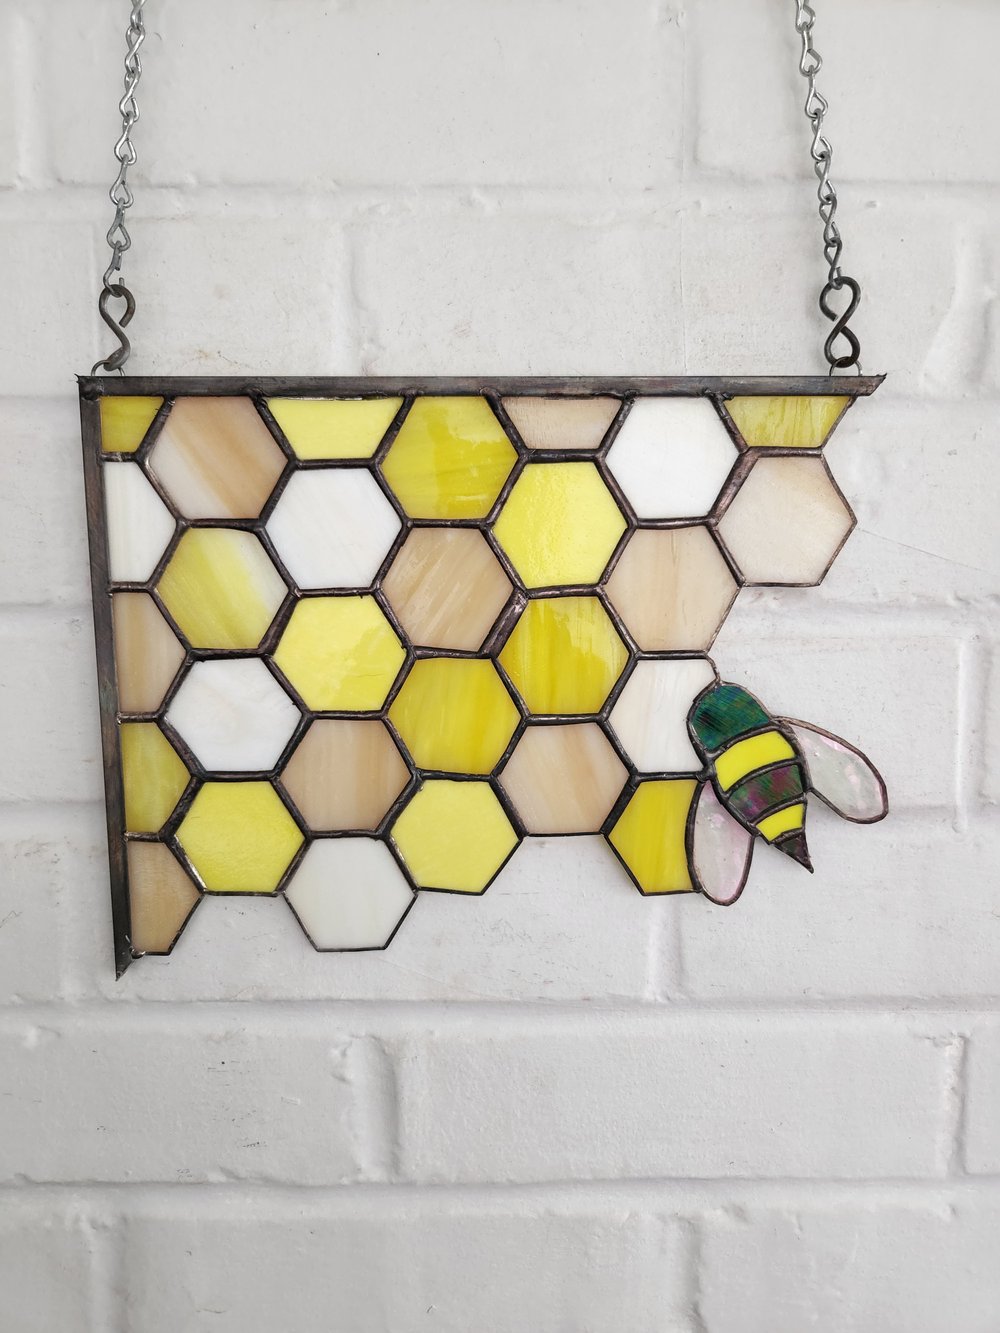 Wall Art / Bee Decor - Honeycomb Be Kind With Resin